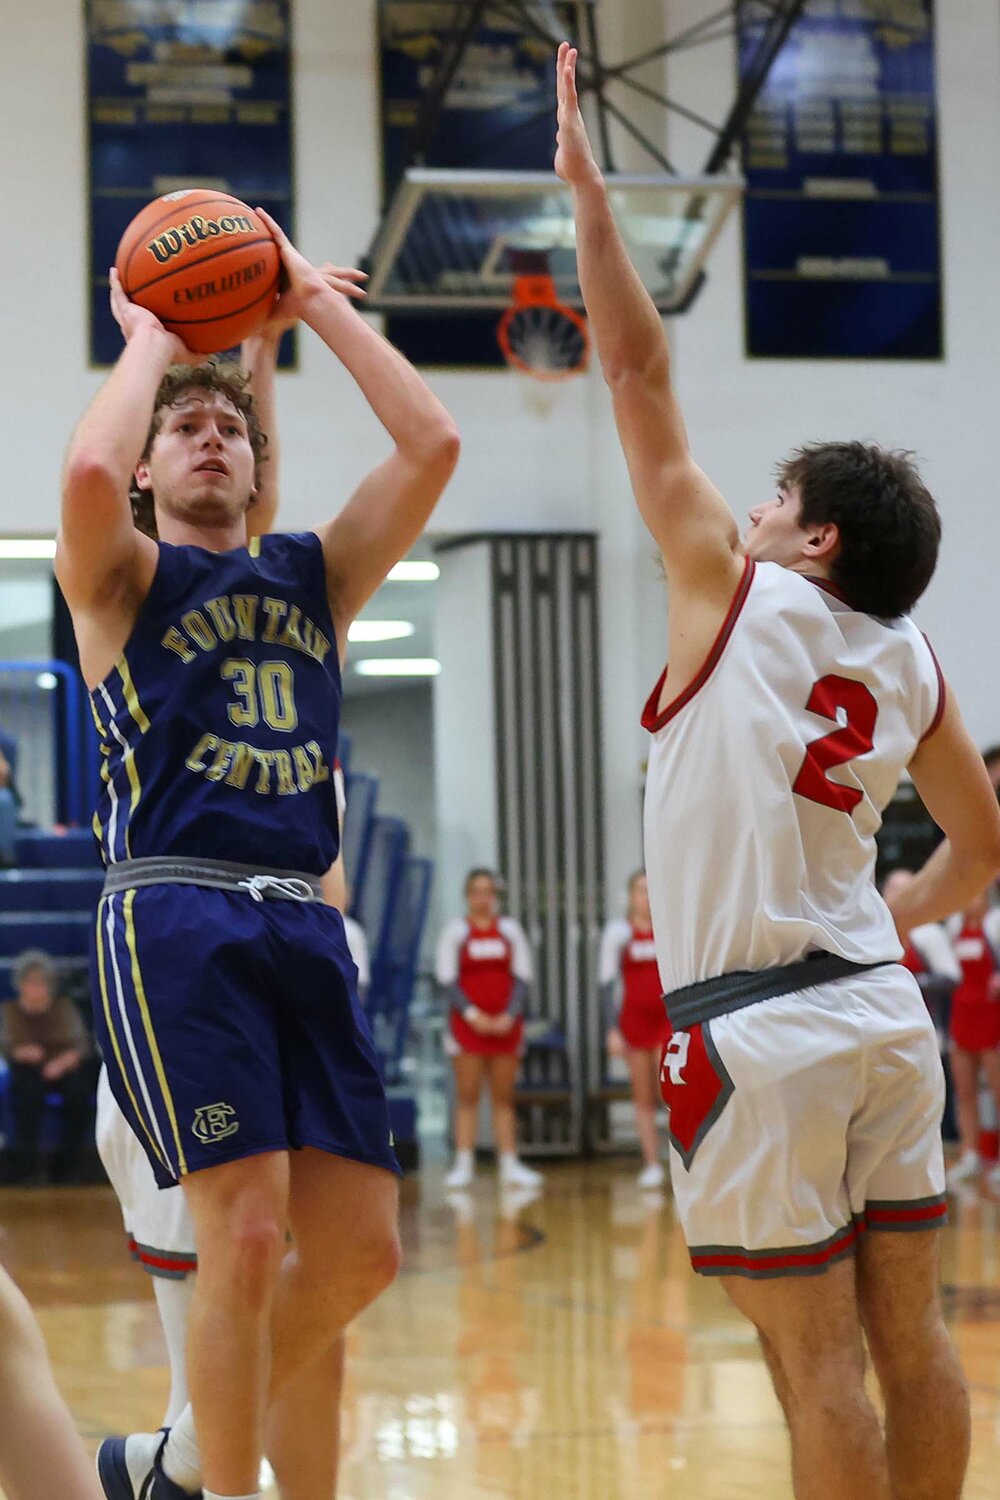 Owen Acton of Fountain Central - shooting a jumper over Matthew Ford of Rossville